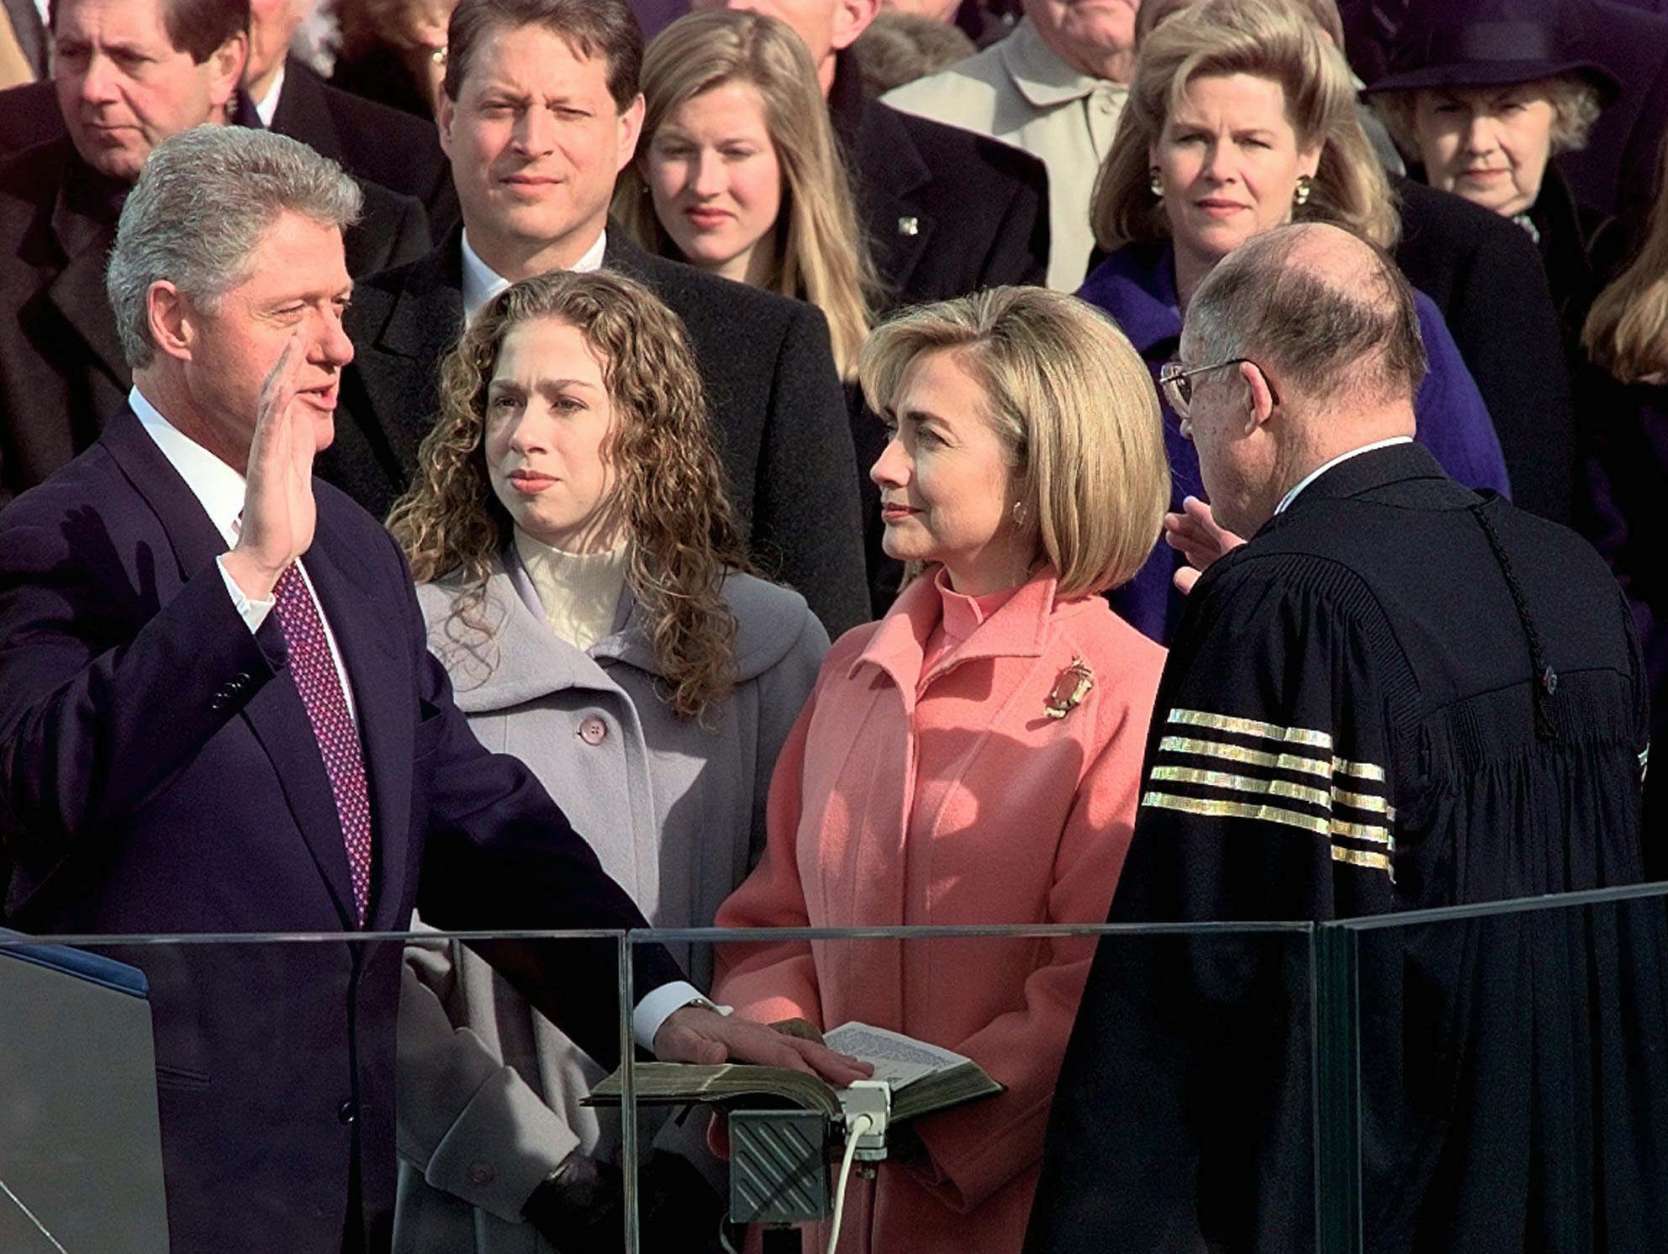 Supreme Court Chief Justice William Rehnquist administers the presidential oath to President Clinton as first lady Hillary Rodham Clinton and daughter Chelsea look on, Monday Jan. 20, 1997 on Capitol Hill. Vice President and Mrs. Gore look on behind the first family. (AP Photo/Doug Mills)